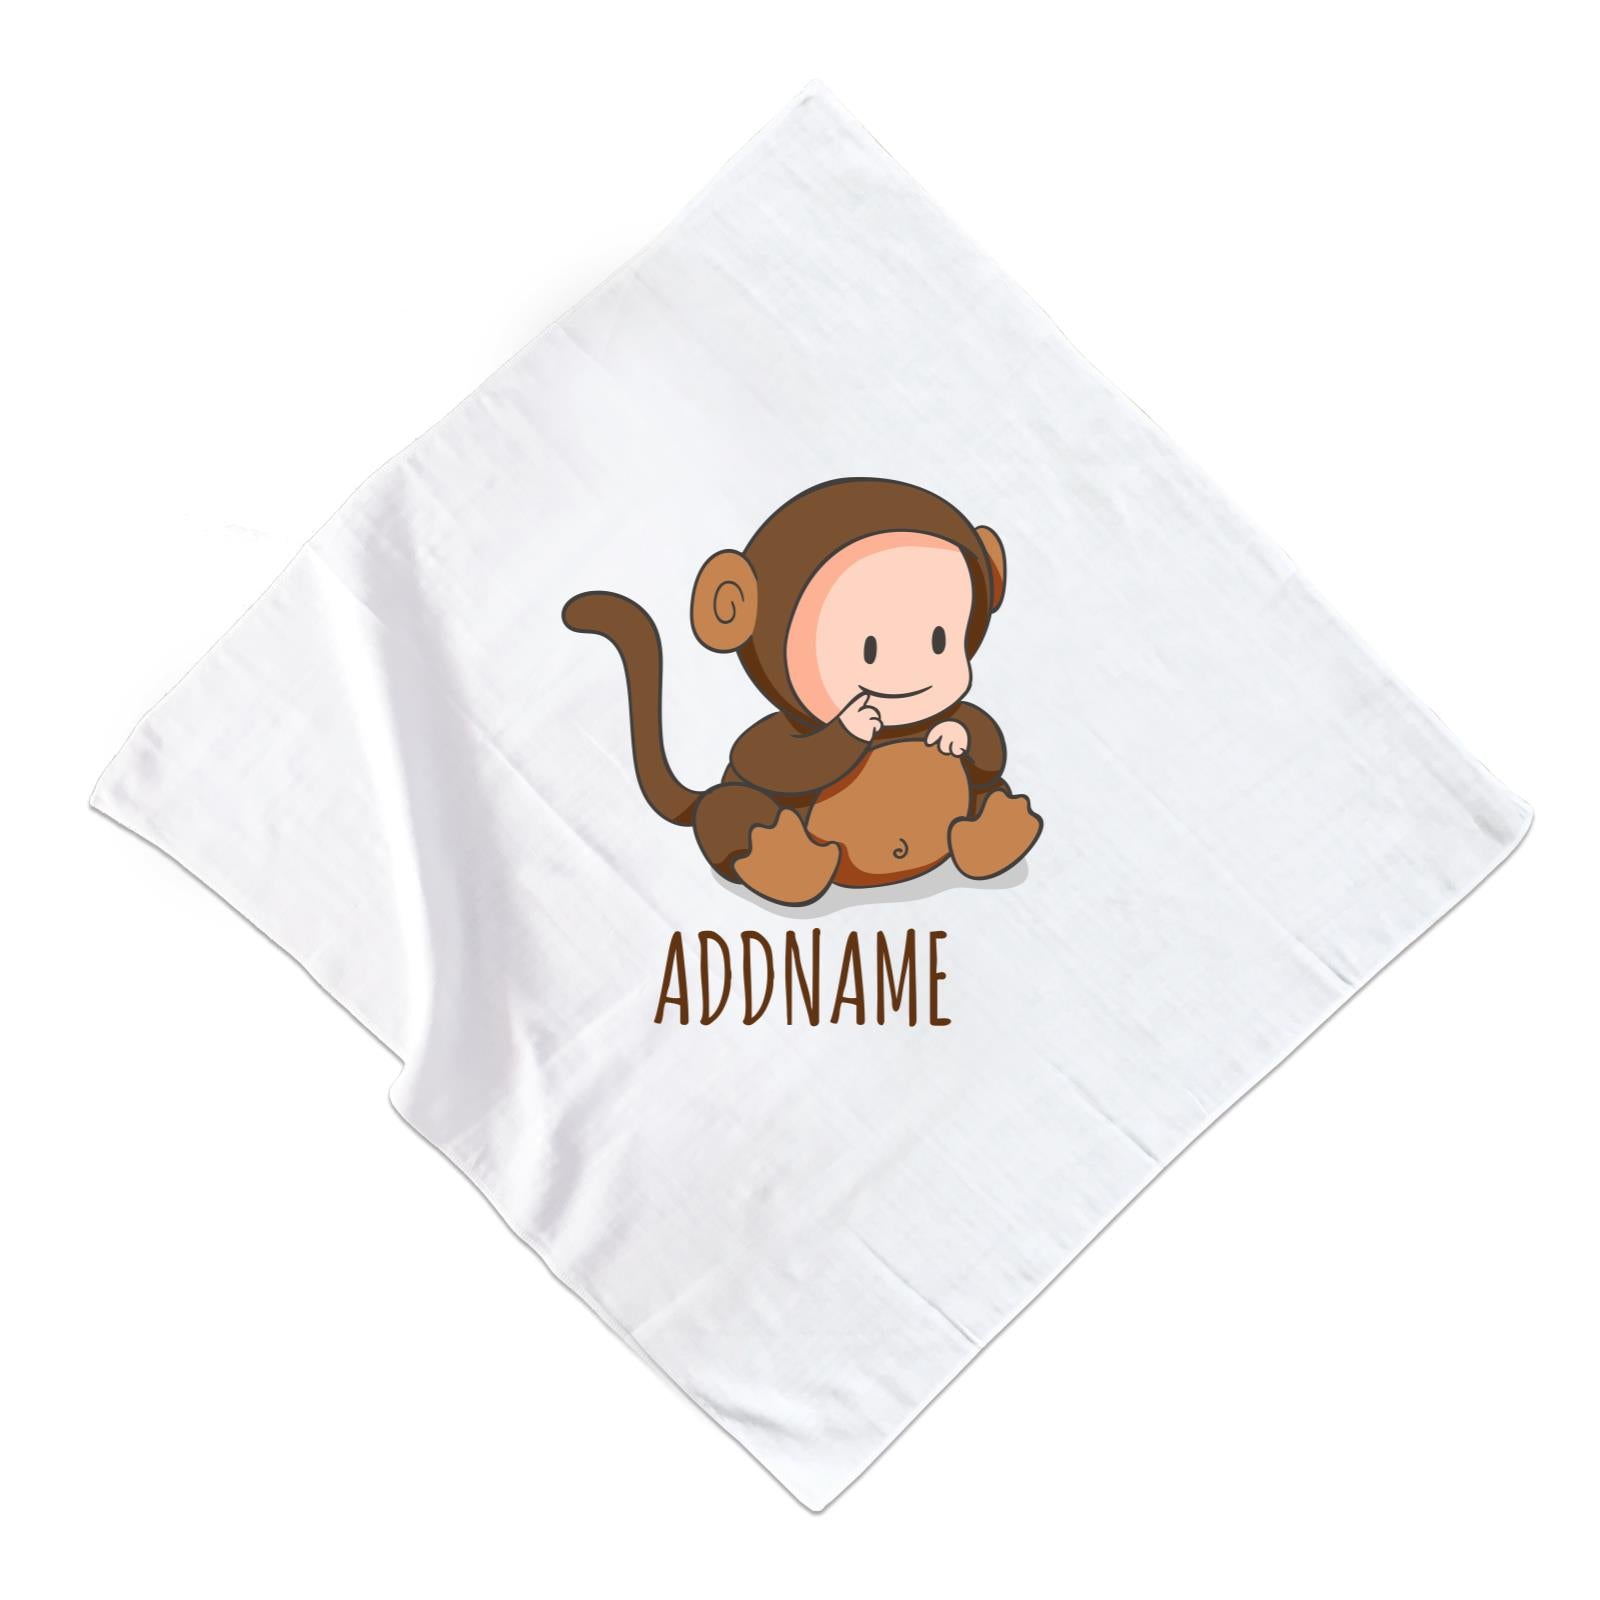 Cute Baby in Brown Monkey Suit Addname Muslin Square